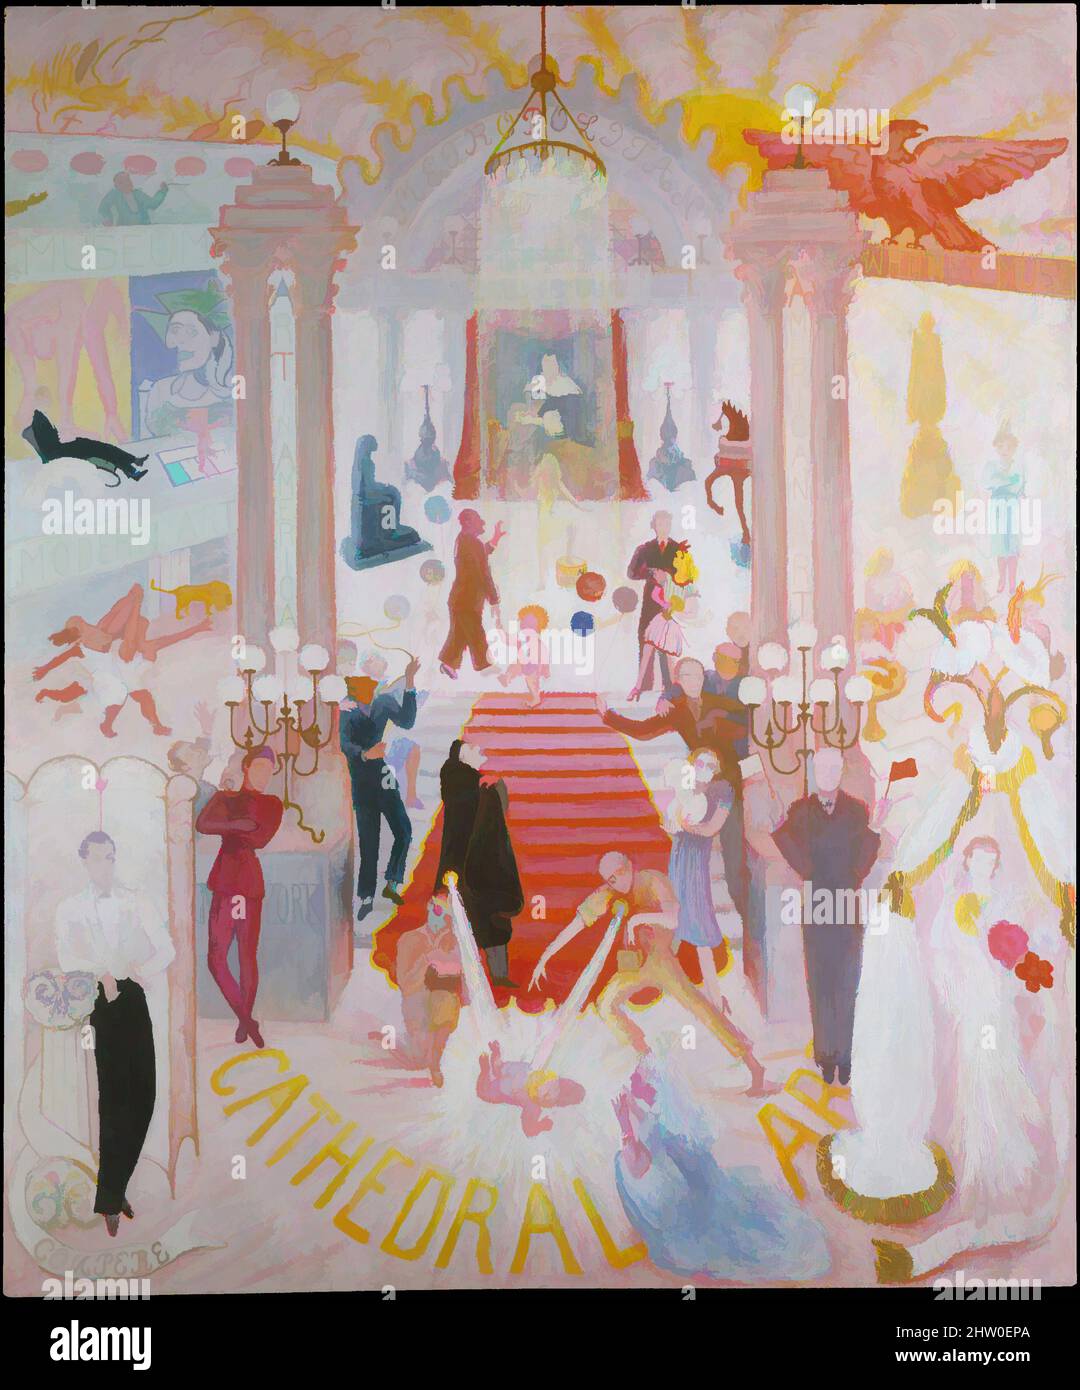 The Cathedrals of Art, 1942, Oil on canvas, 60 1/4 x 50 1/4 in. (153 x  127.6 cm), Paintings, Florine Stettheimer (American Stock Photo - Alamy